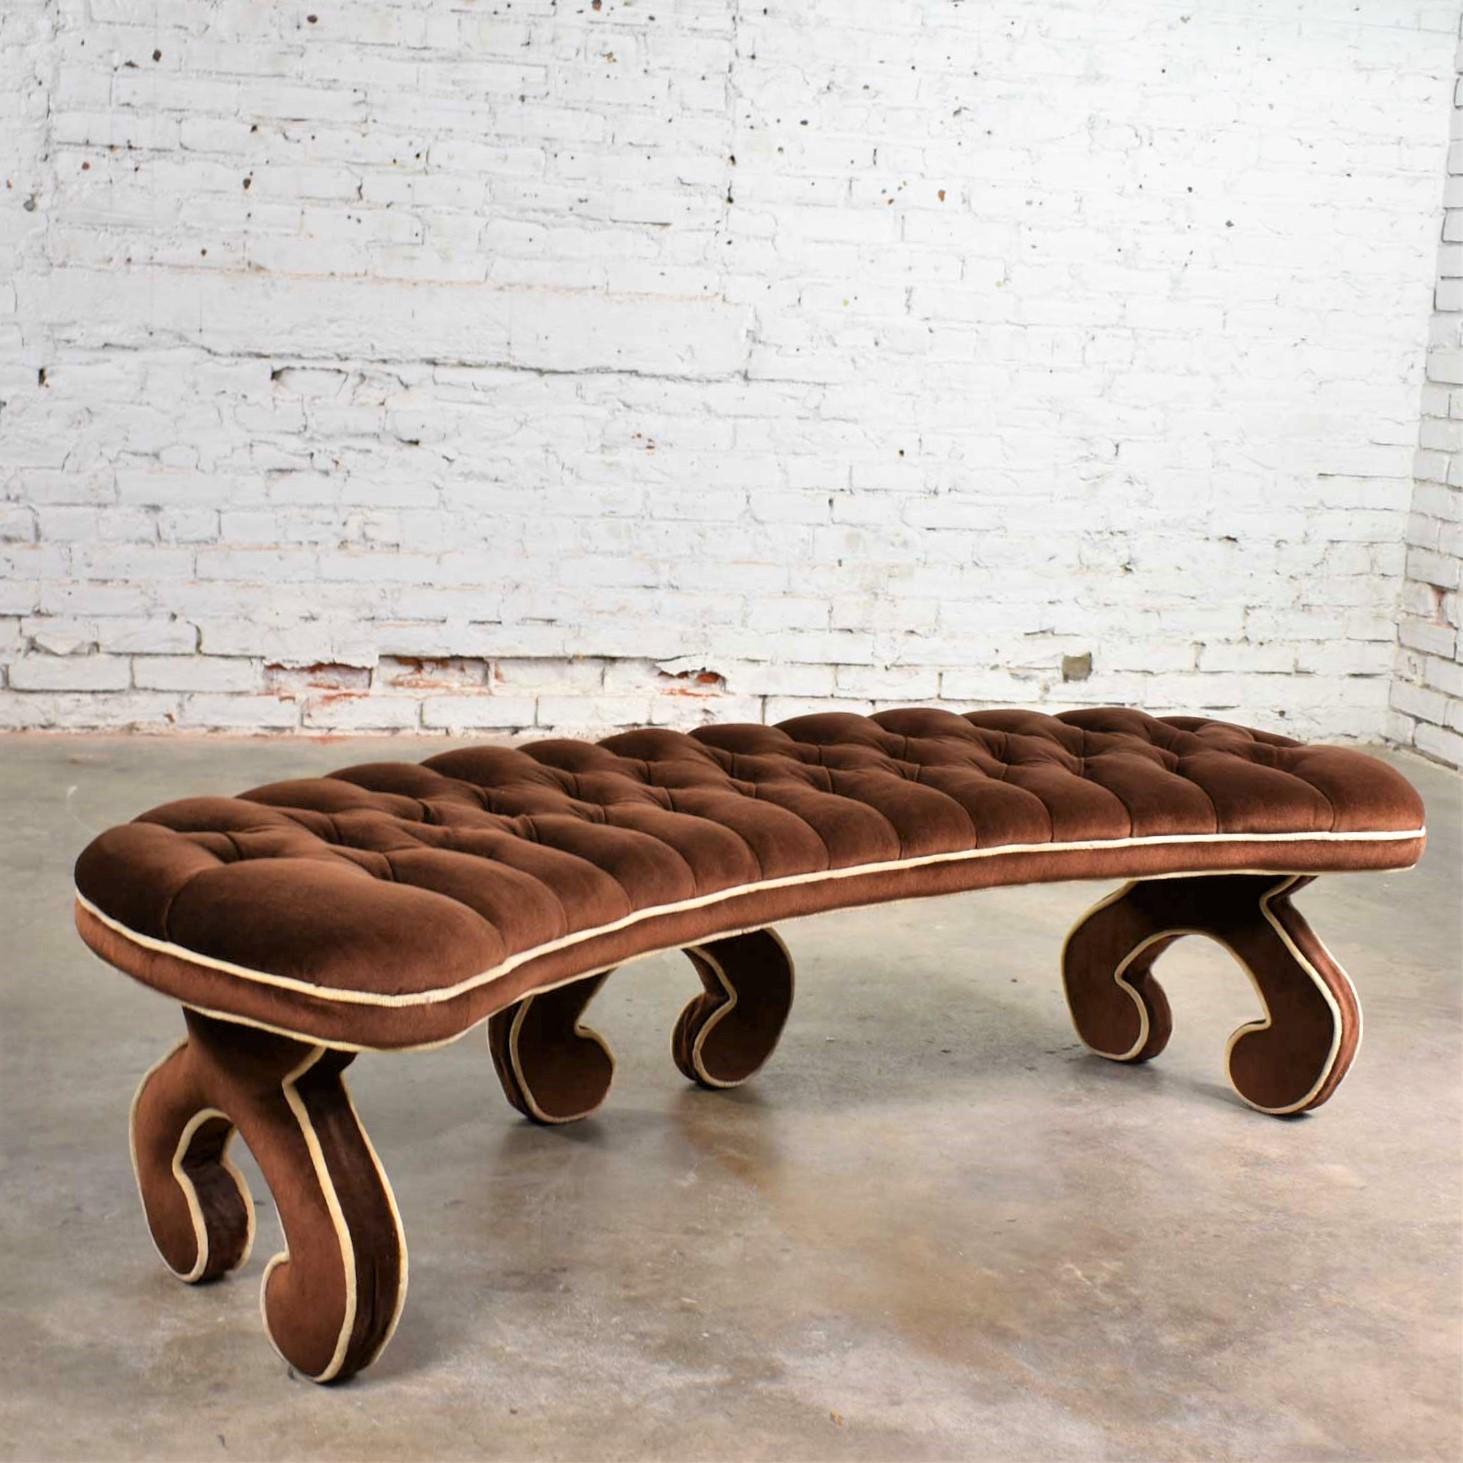 20th Century Hollywood Regency Curved Bench Fully Upholstered & Tufted in Cocoa Brown Velvet For Sale